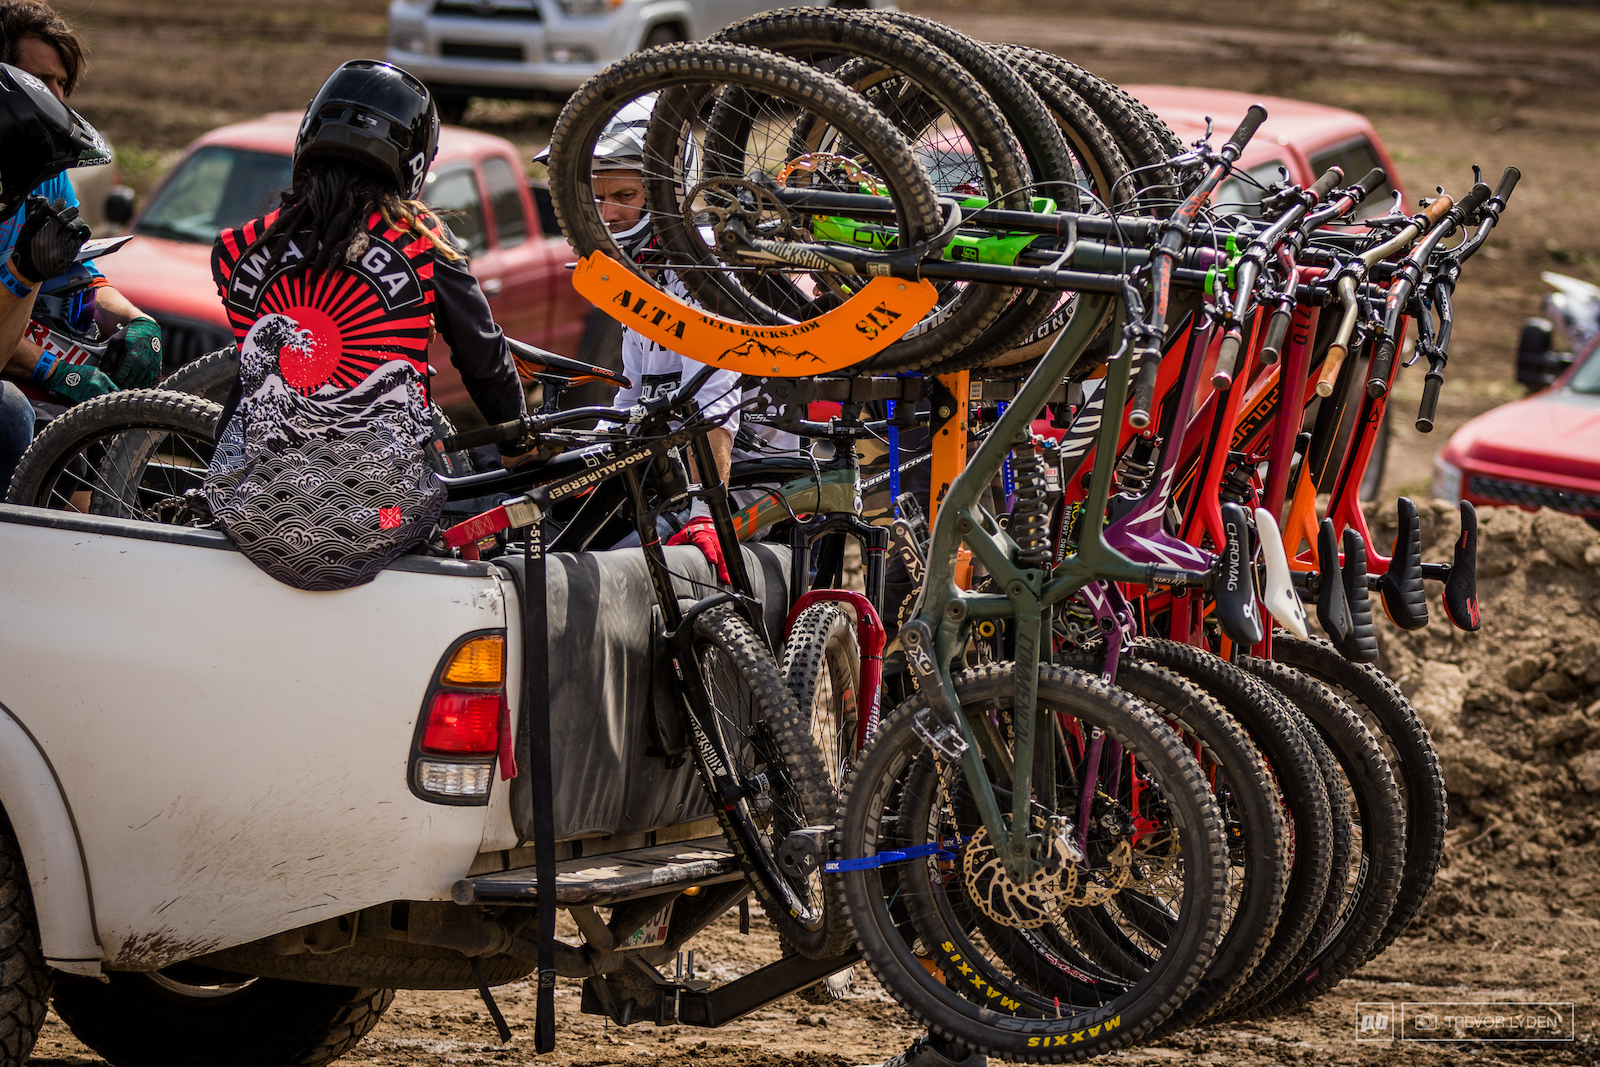 Alta Racks provided a vertical six bike carrier to help with the shuttle.